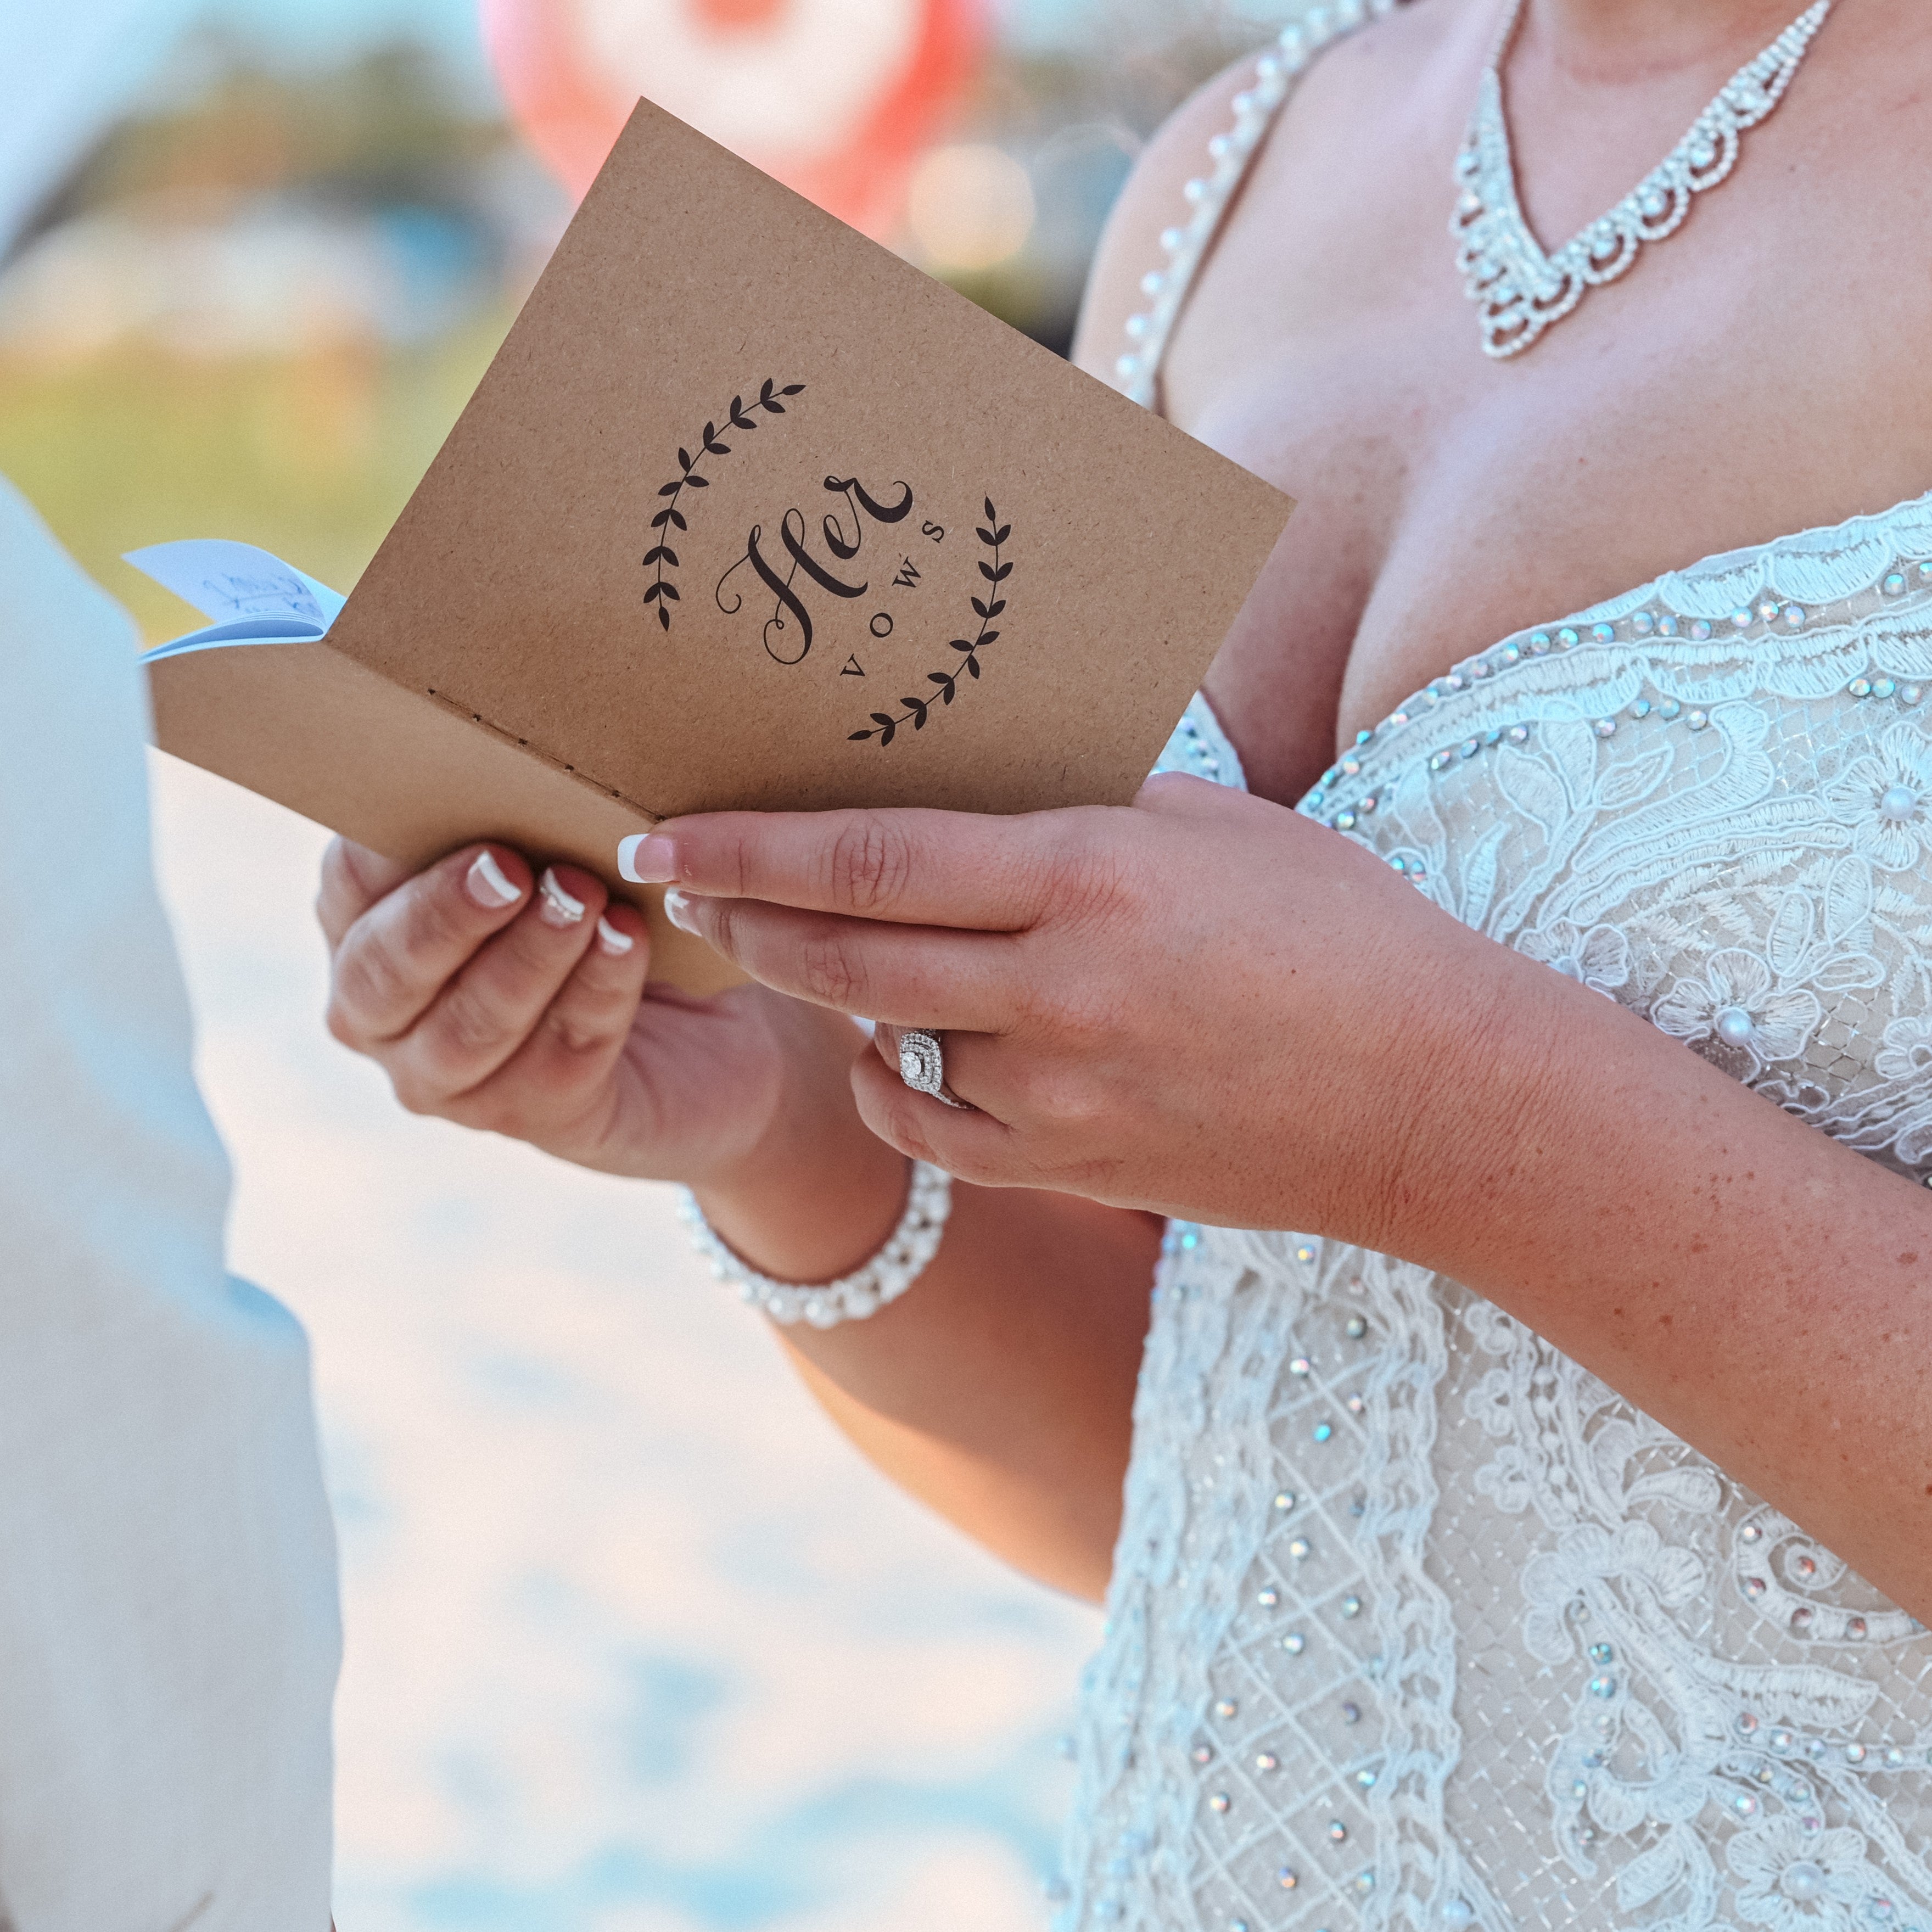 panama city beach and destin wedding officiant minister & notary